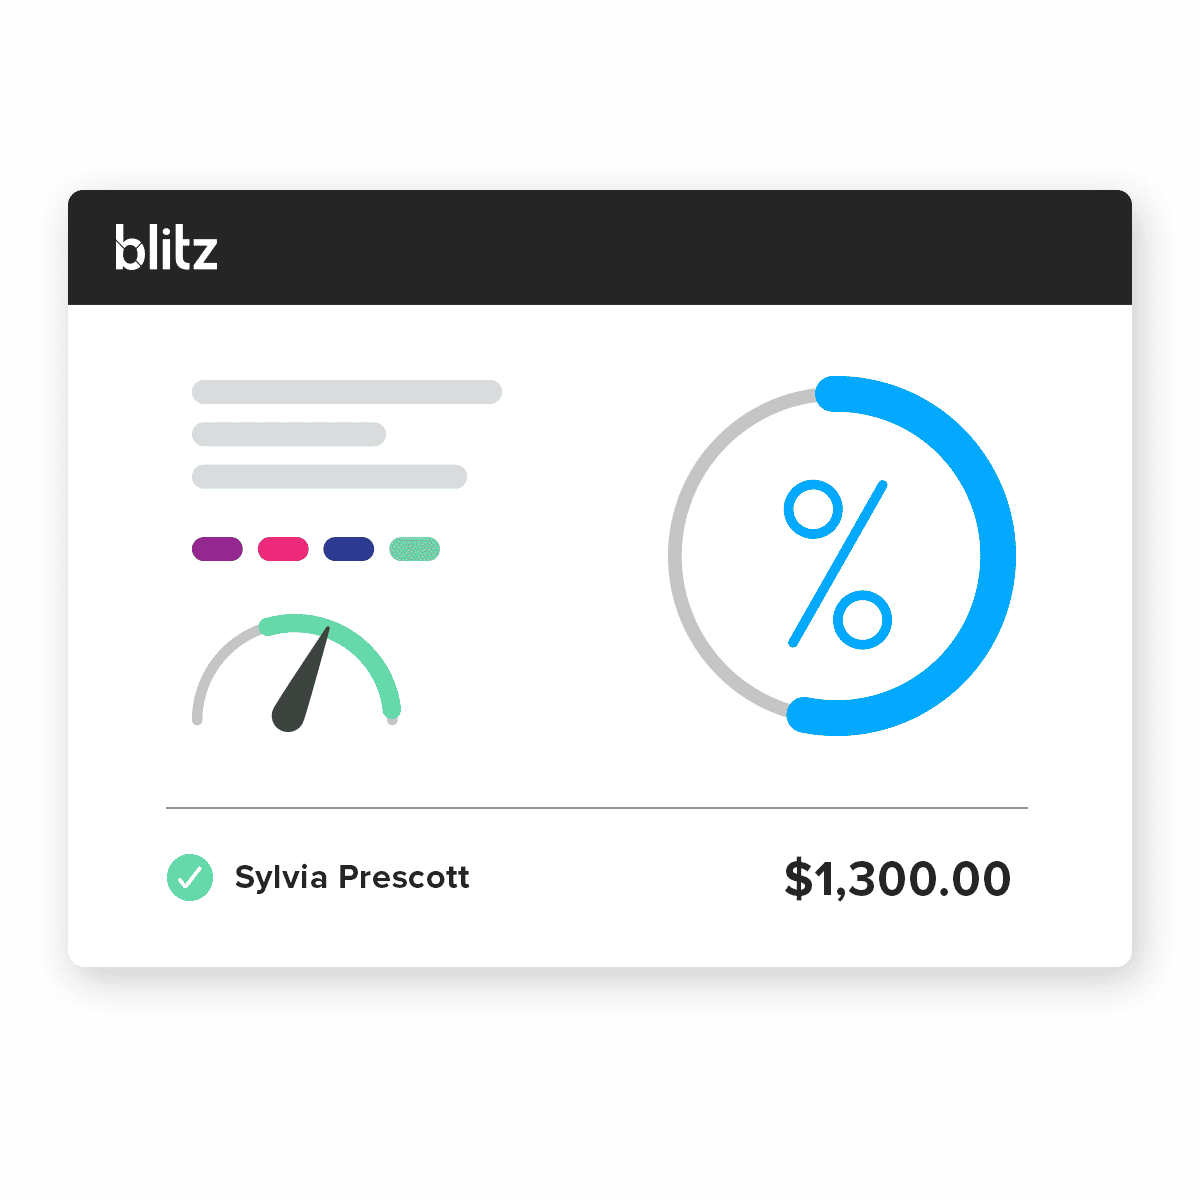 With Blitz, allow managers and teams to visualize real-time data, eliminate incorrect payments, and run manual calculations while ensuring payments are done on time.